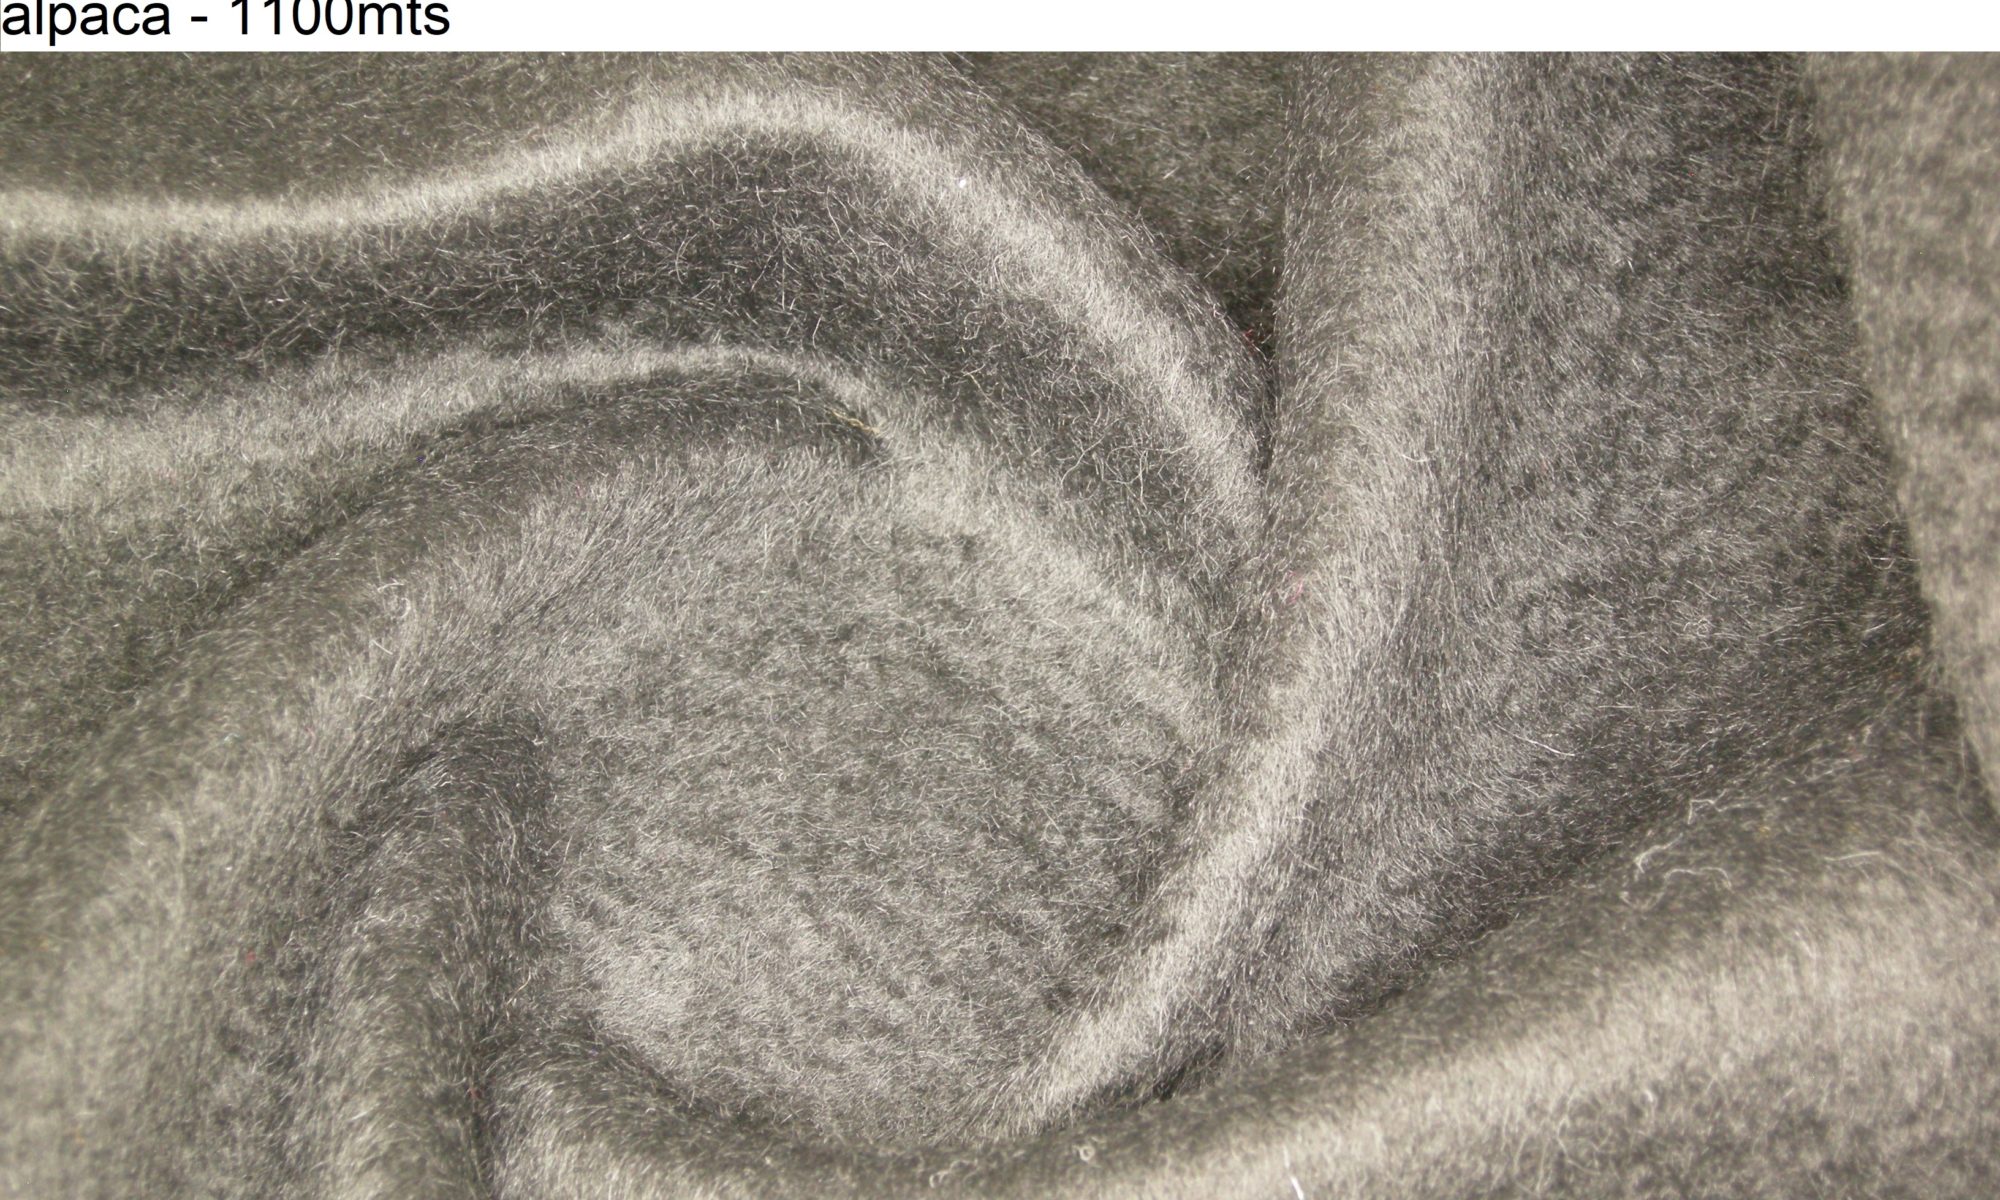 ART 7736 Black mohair alpaca hairy brushed coat fashion fabric WIDTH cm148 WEIGHT gr440 COMPOSITION 75 wool 15 polyammide 5 mohair 5 alpaca - 1100mts